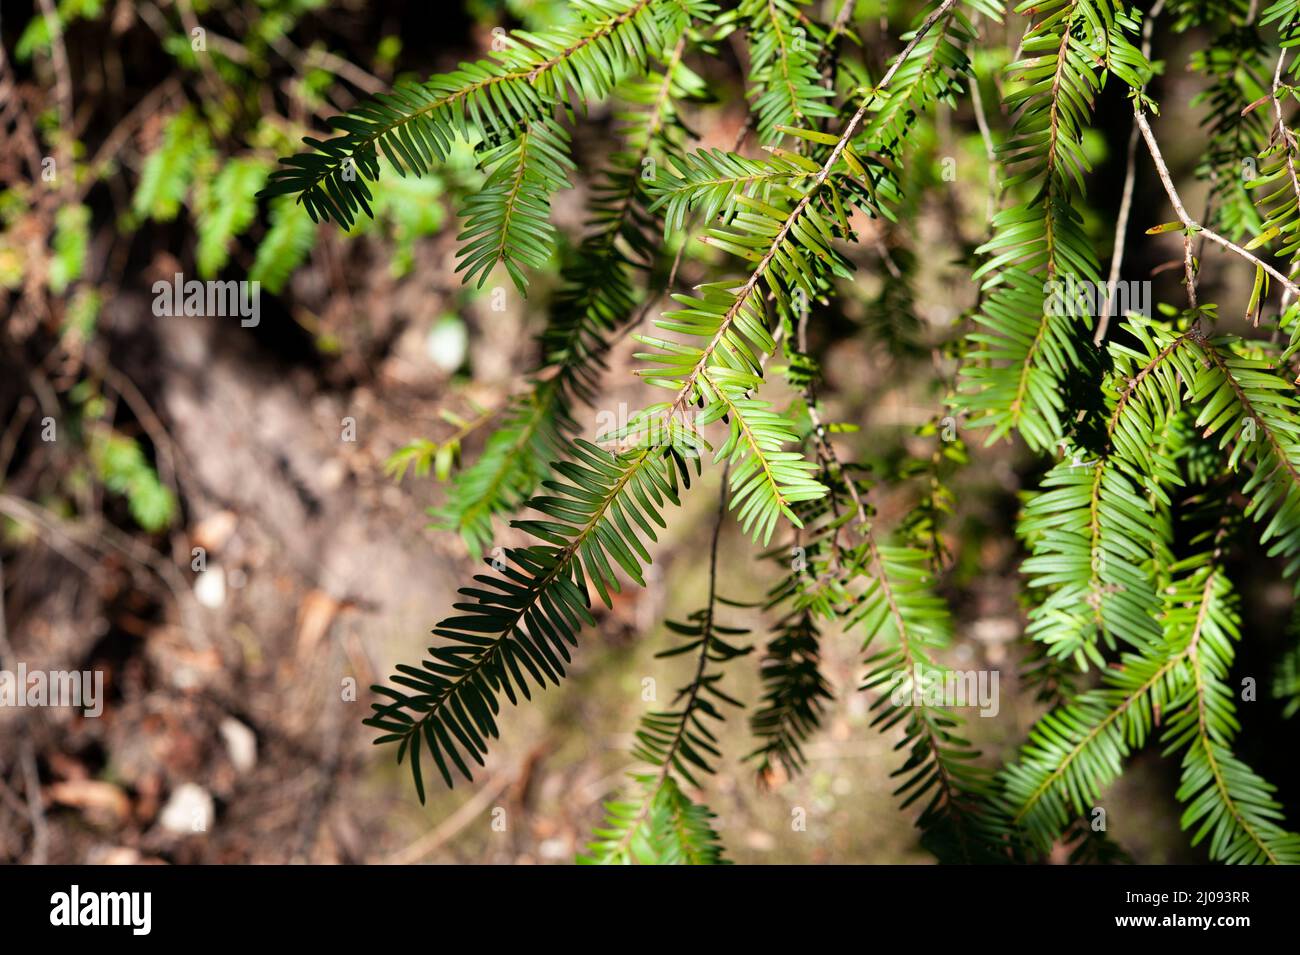 Taxus baccata is a species of evergreen tree in the family Taxaceae, also know as yew.. Stock Photo